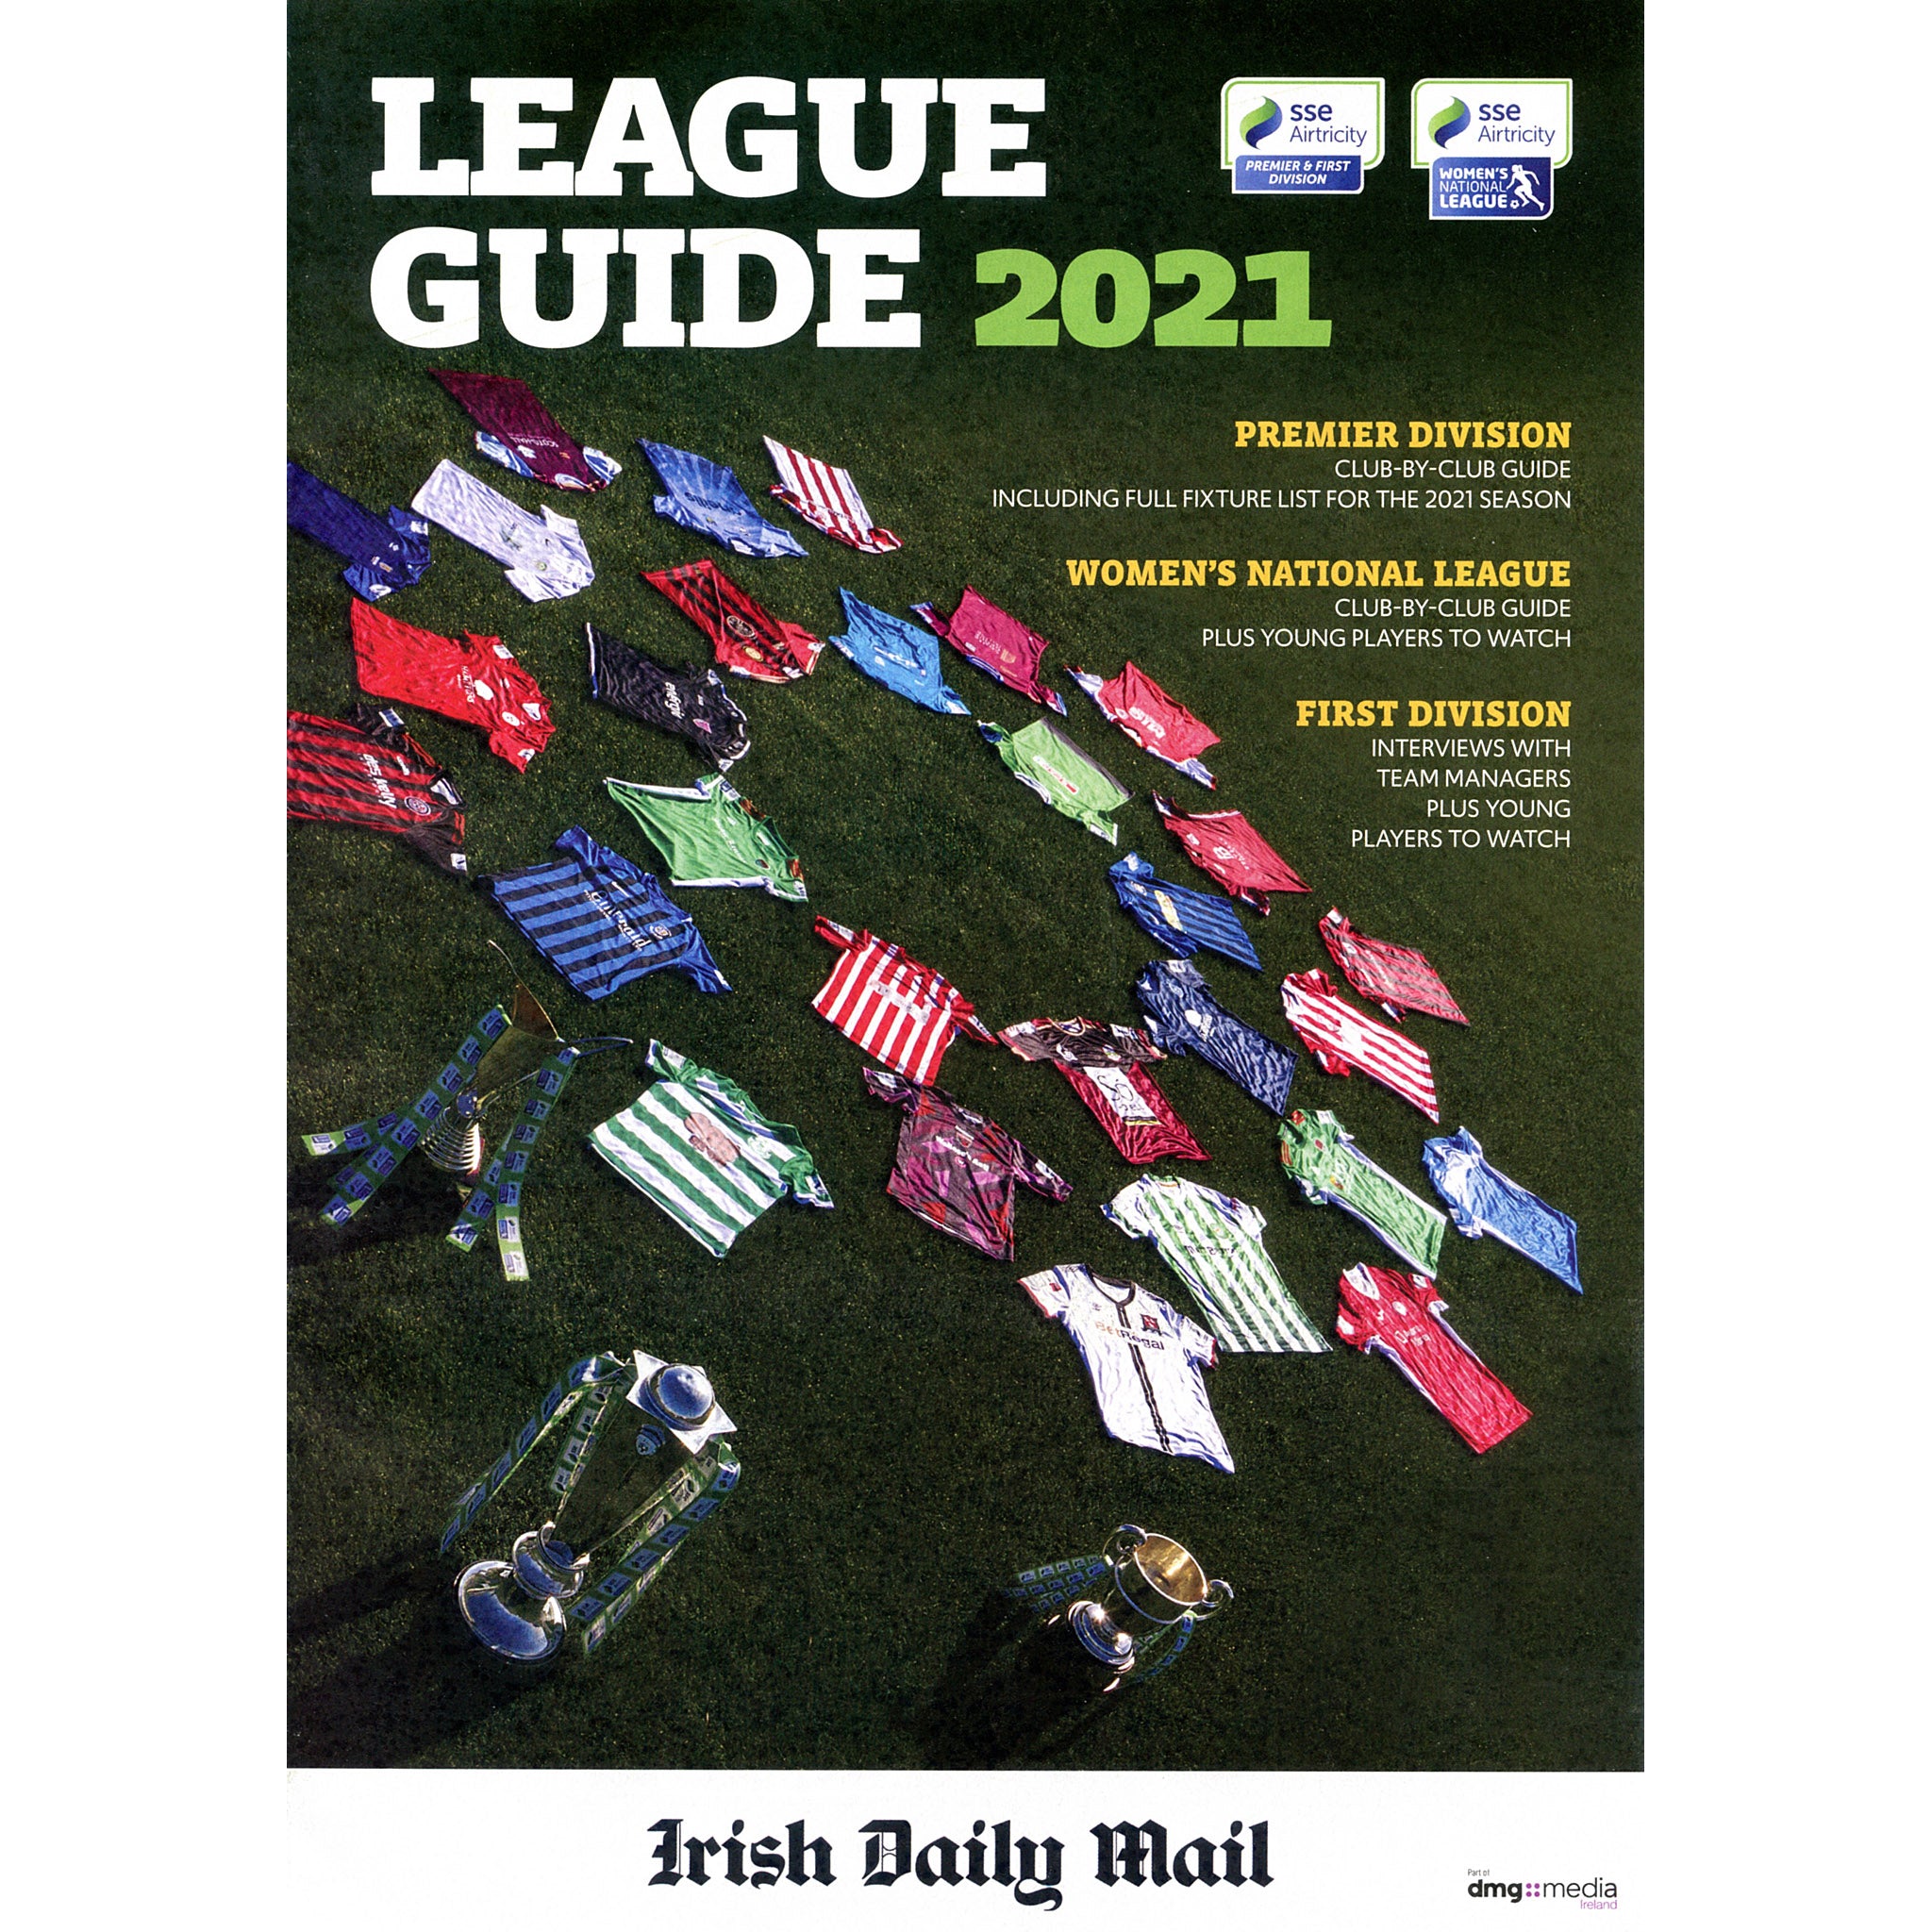 SSE Airtricity League Guide 2021 (Ireland Season Preview)